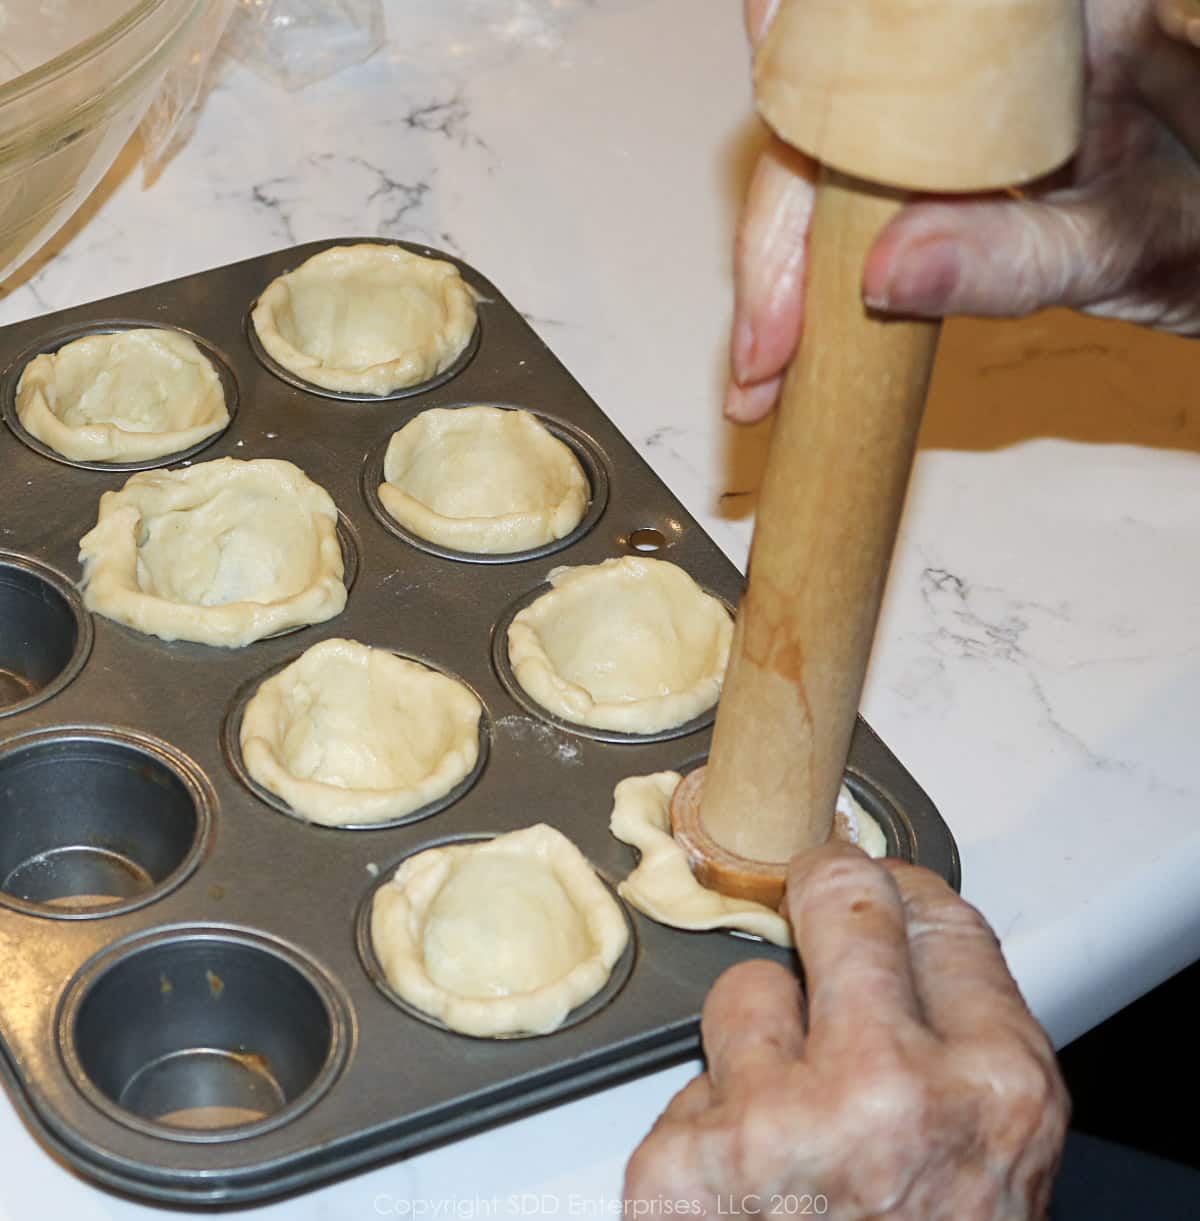 a tart tamper forming the crust for tarts